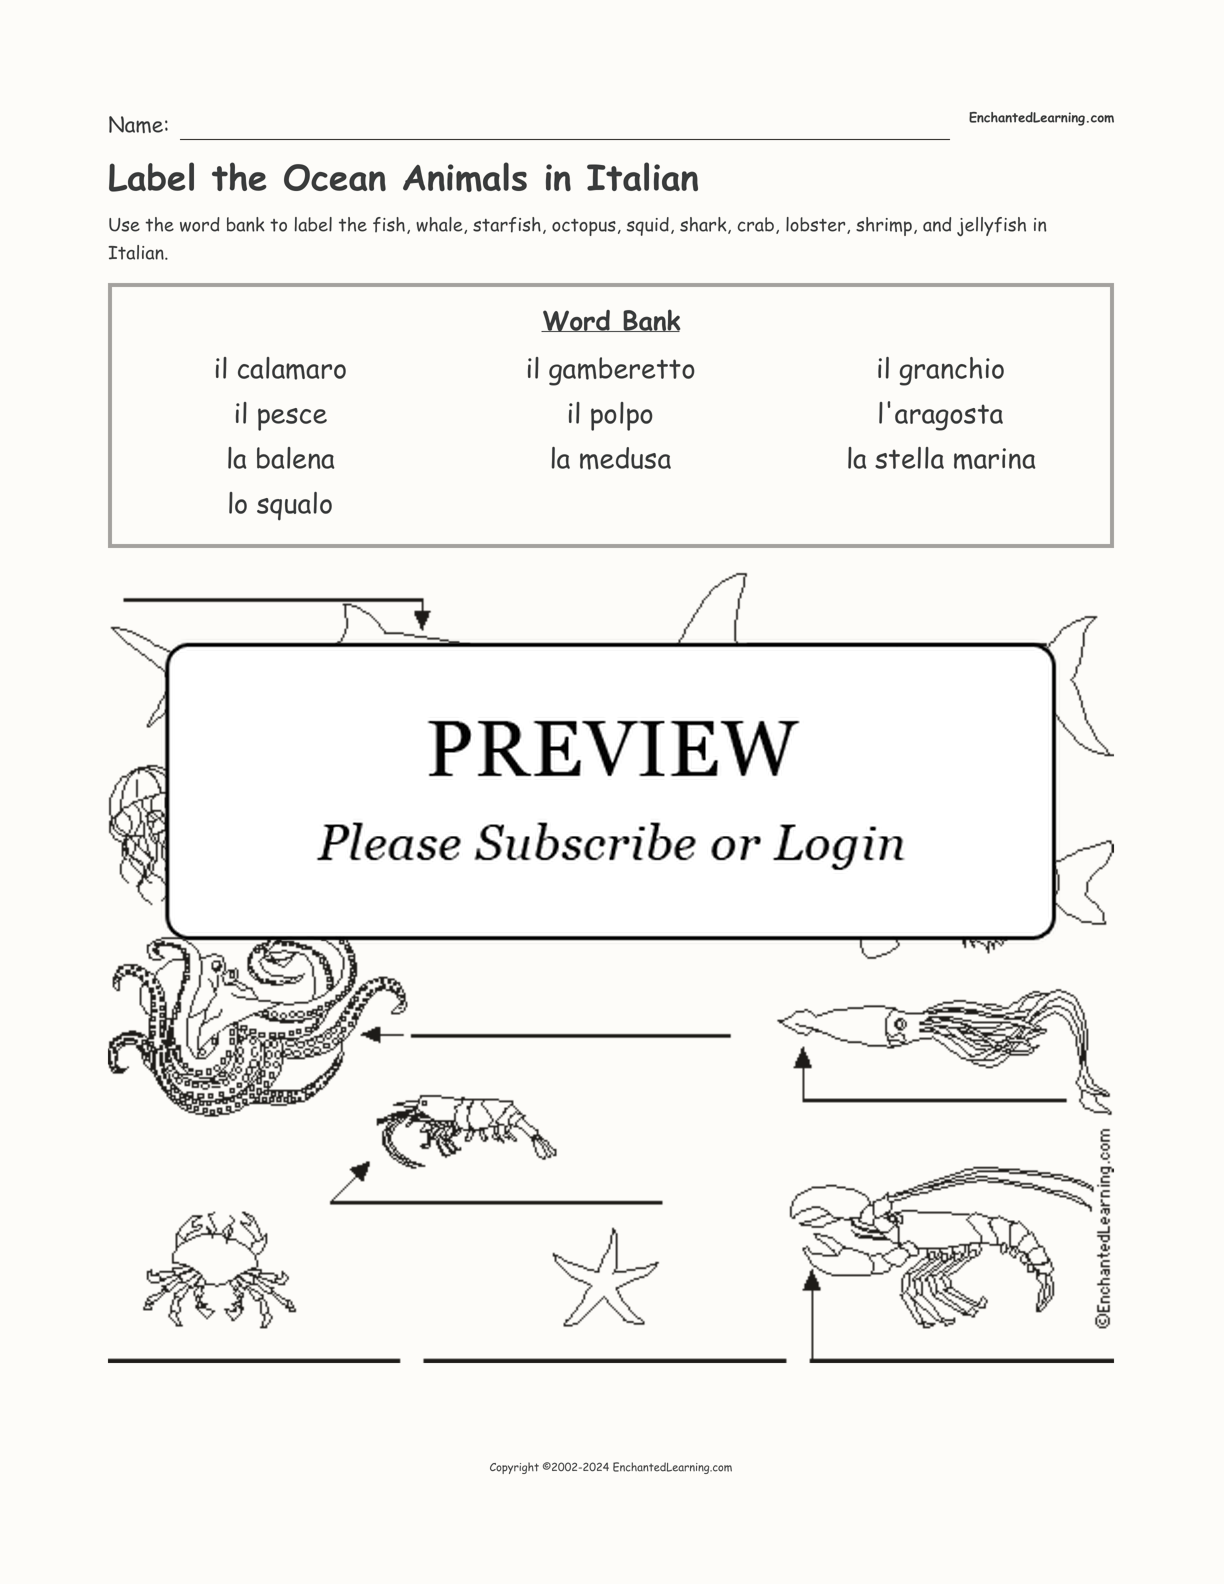 Label the Ocean Animals in Italian interactive worksheet page 1